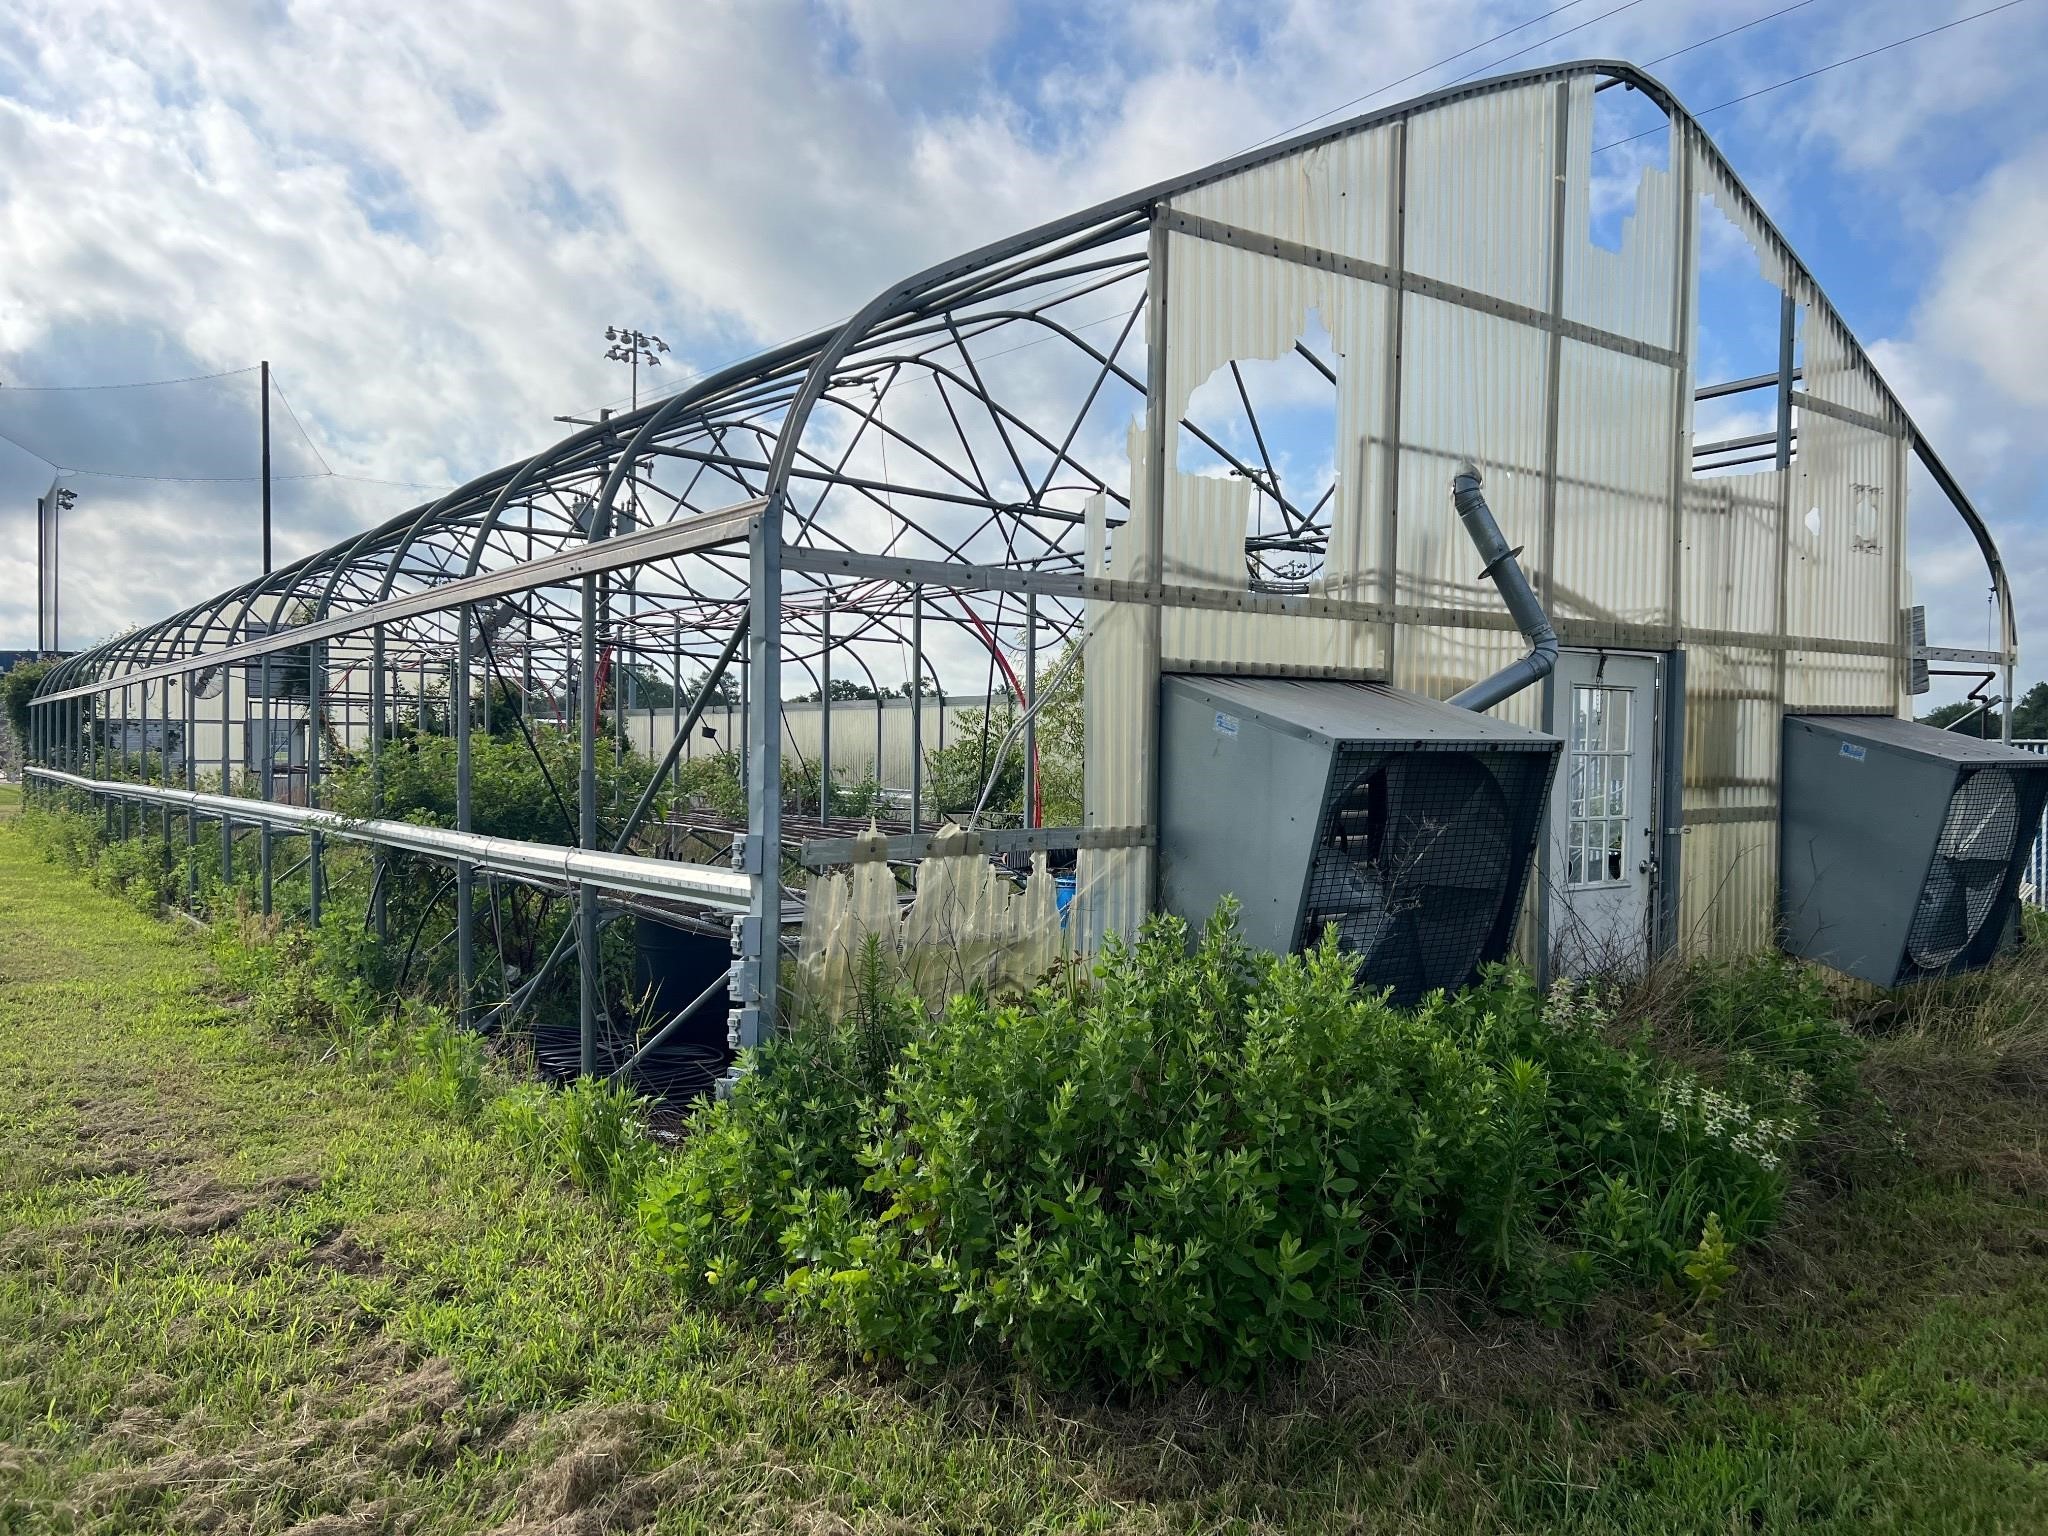 RAINS ISD GREENHOUSE, BUILDING, TRUCK AUCTION